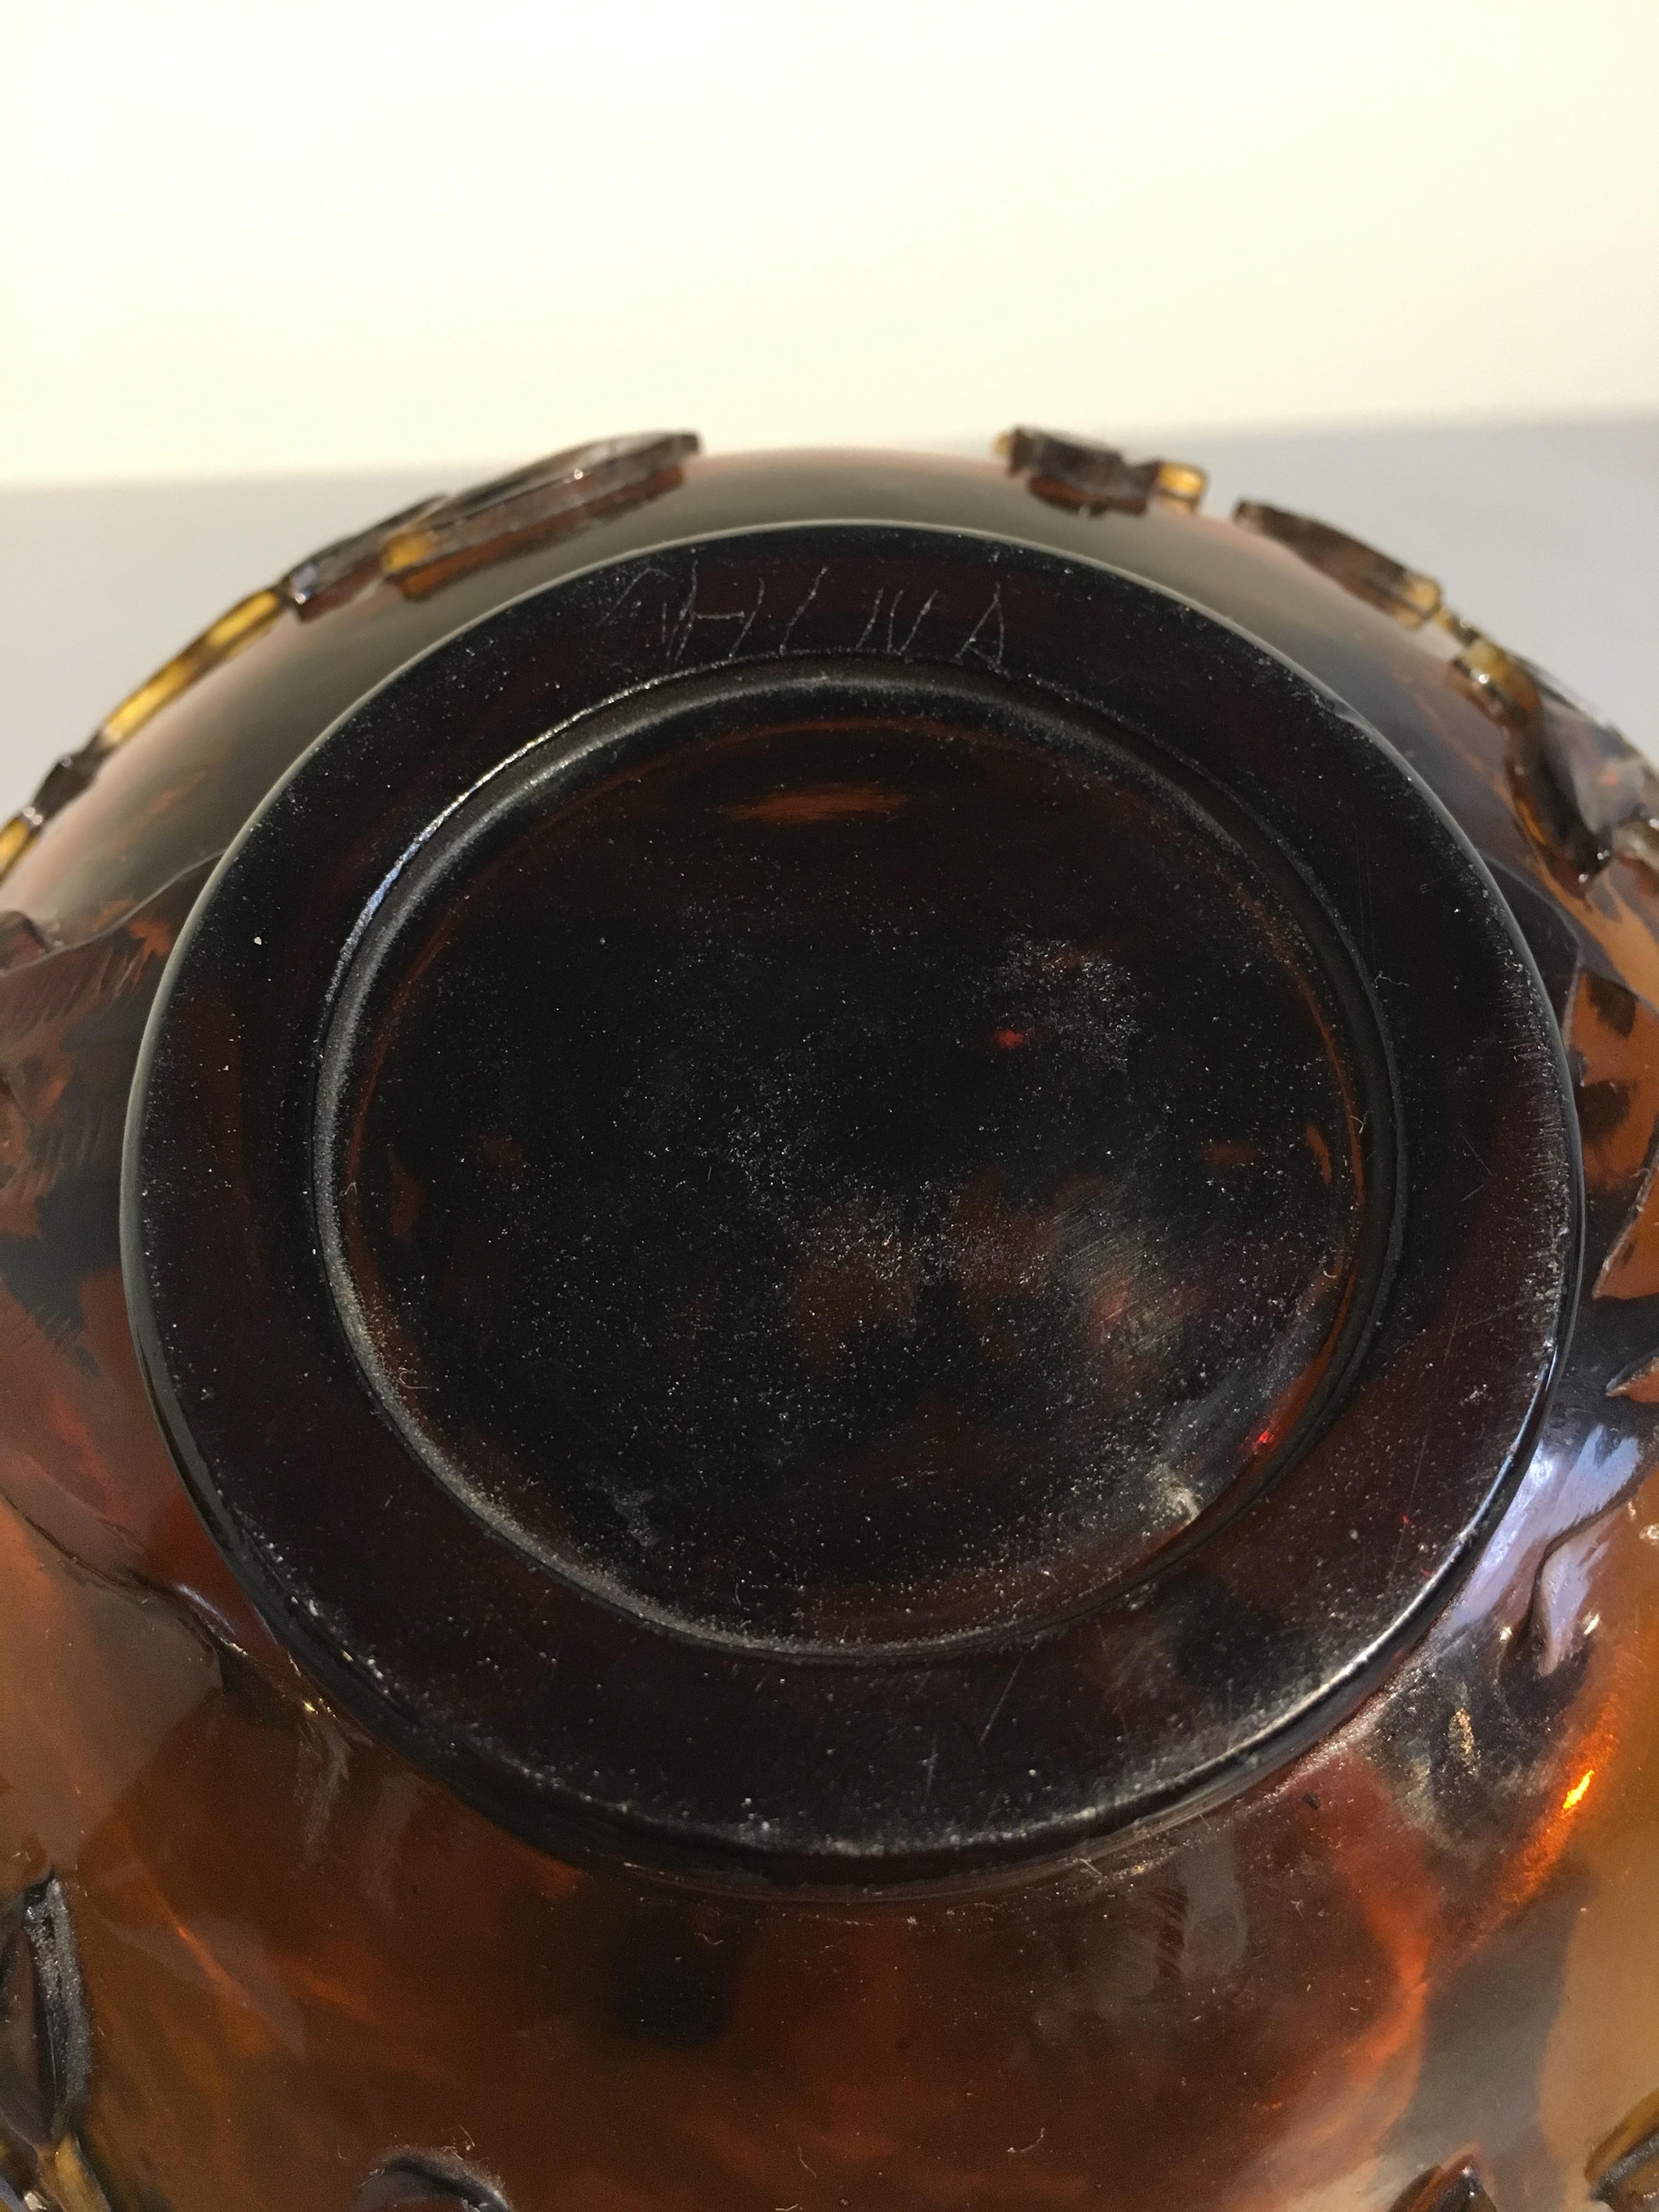 Pair of Chinese Amber Peking Glass Carved Bowls, Qing Dynasty, Late 19th Century For Sale 3